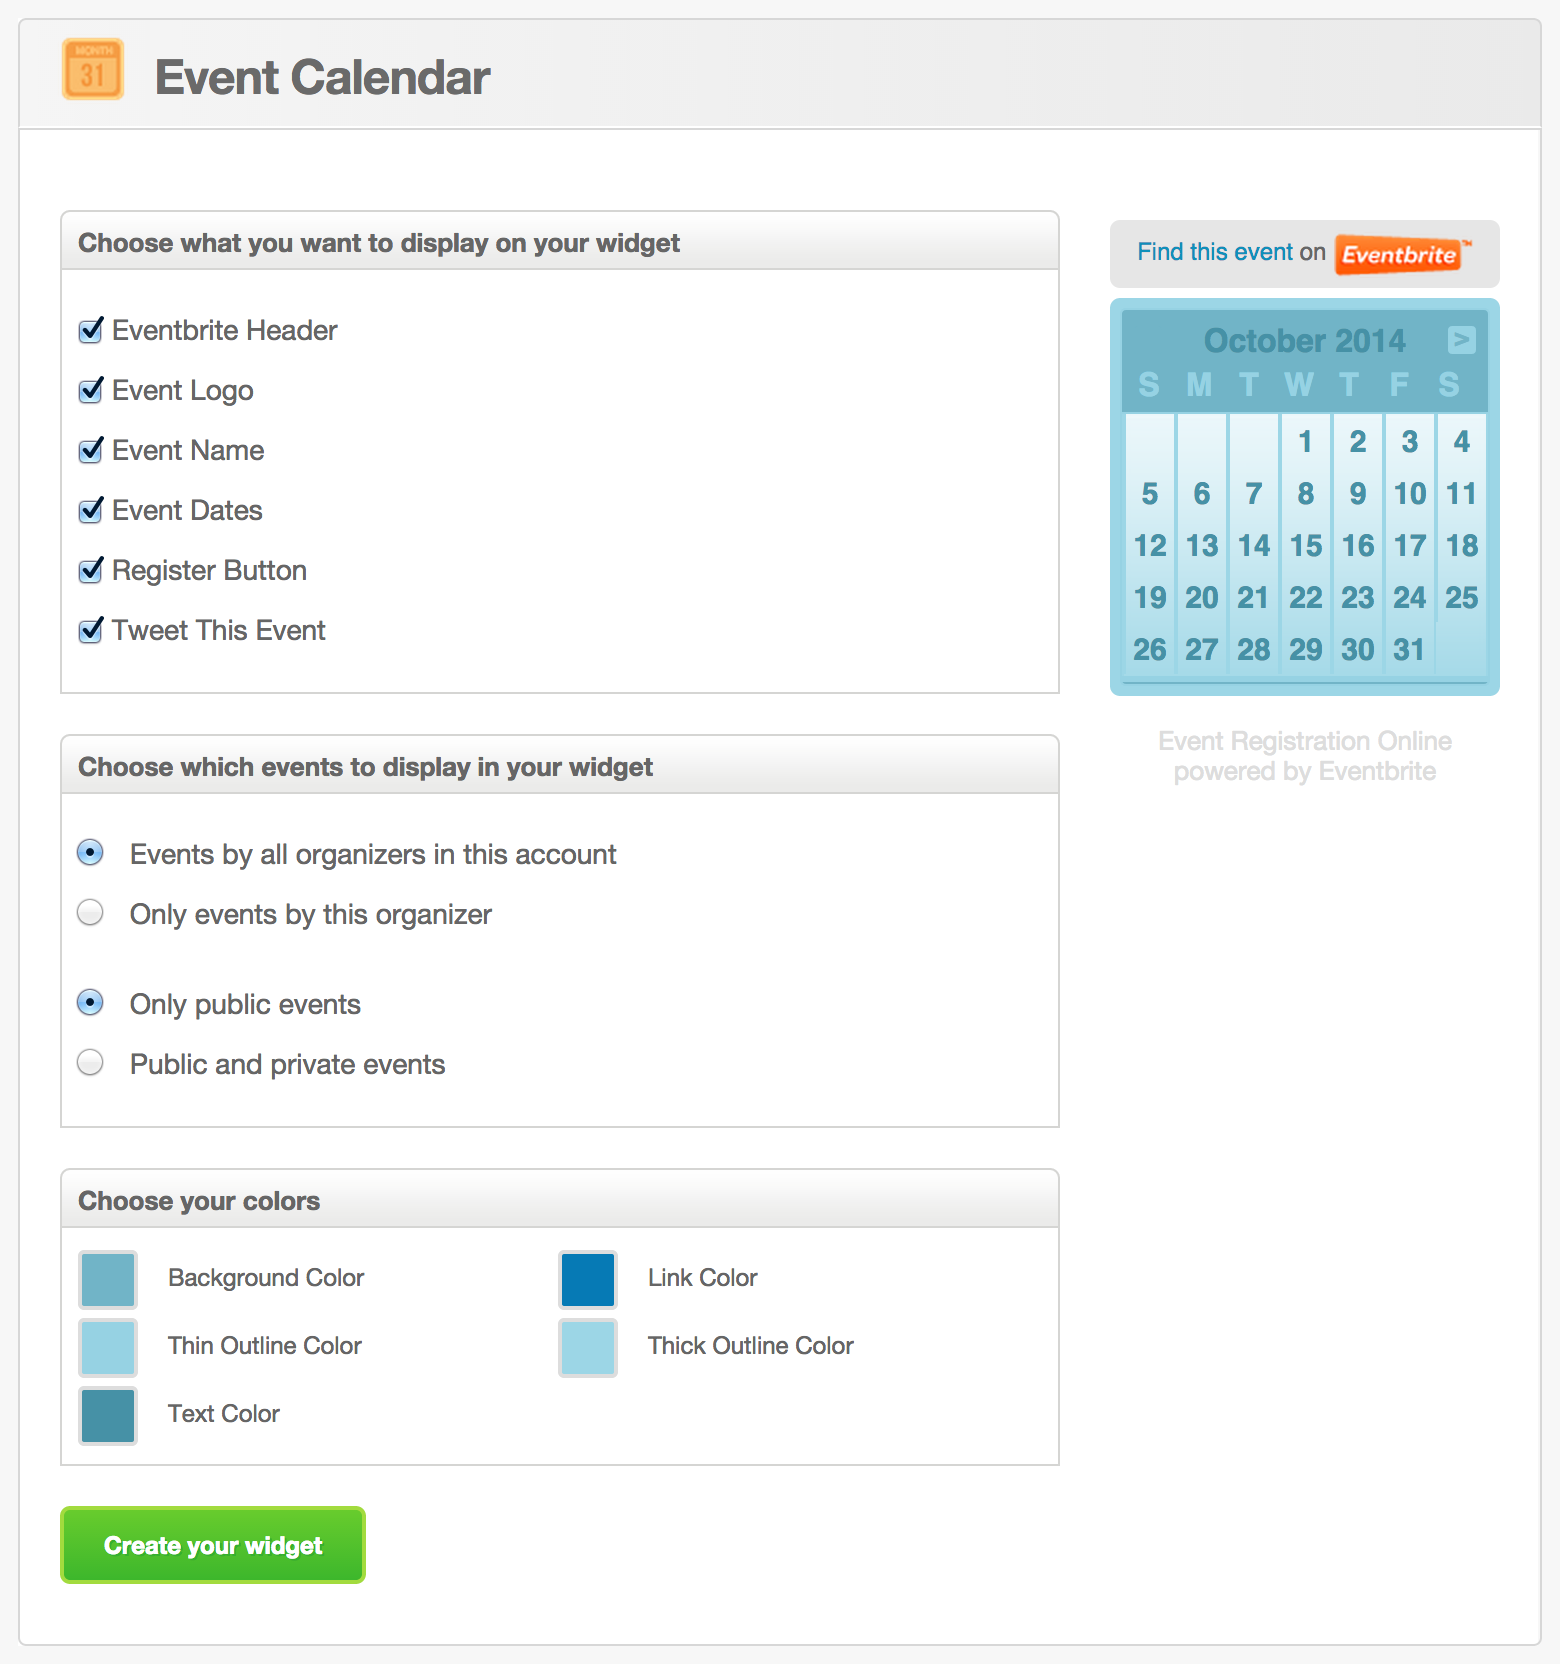 eventbrite costs to sell tickets